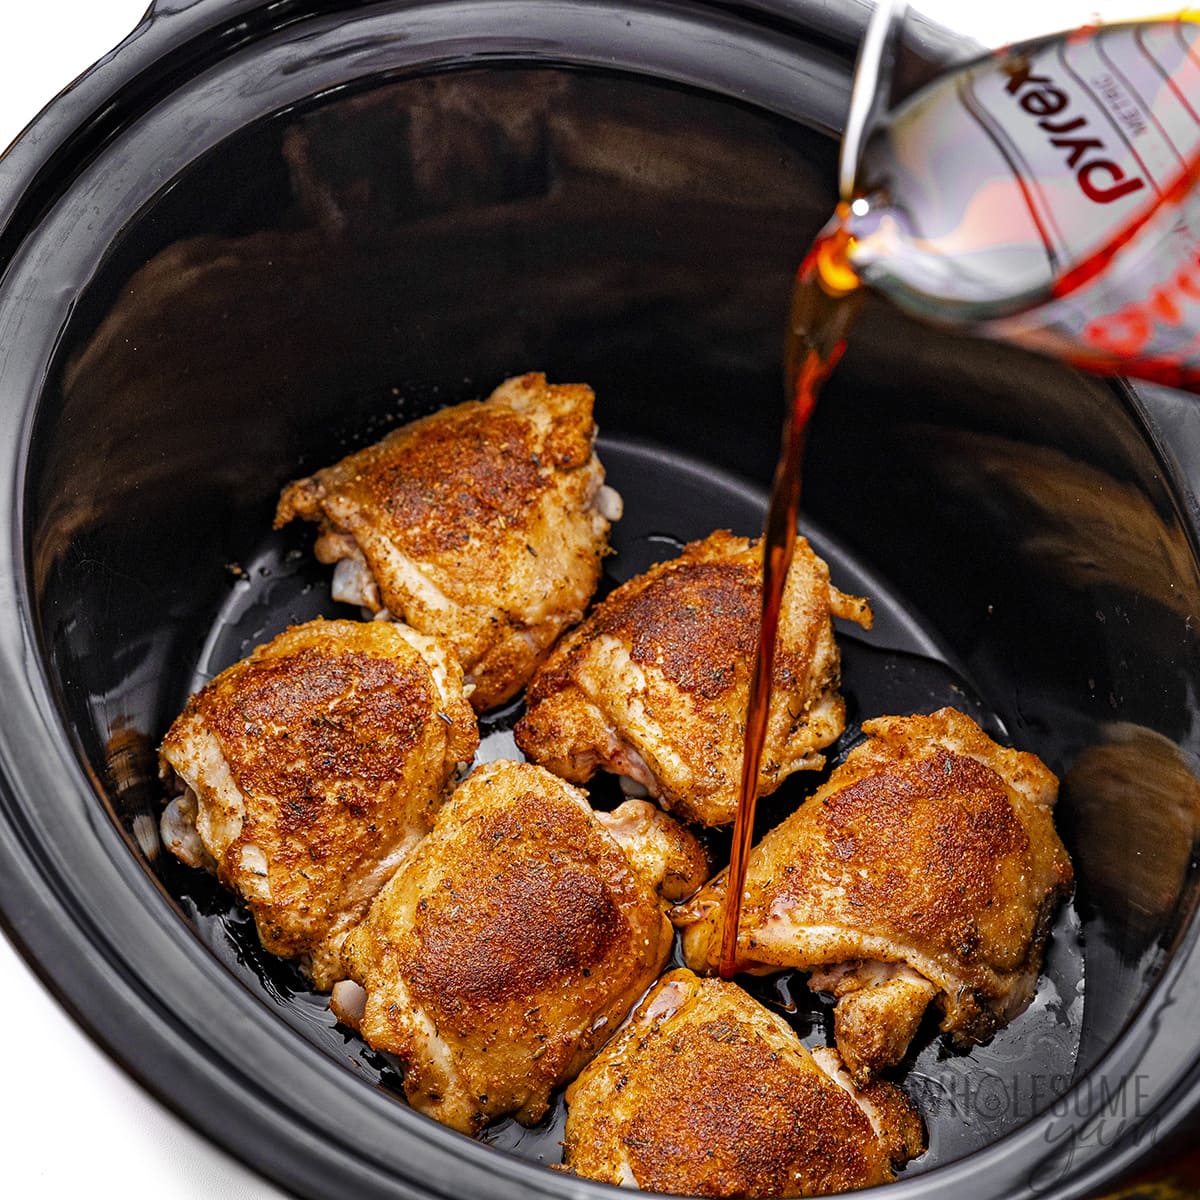 Pour the honey and coconut aminos mixture over the chicken thighs in the pan.